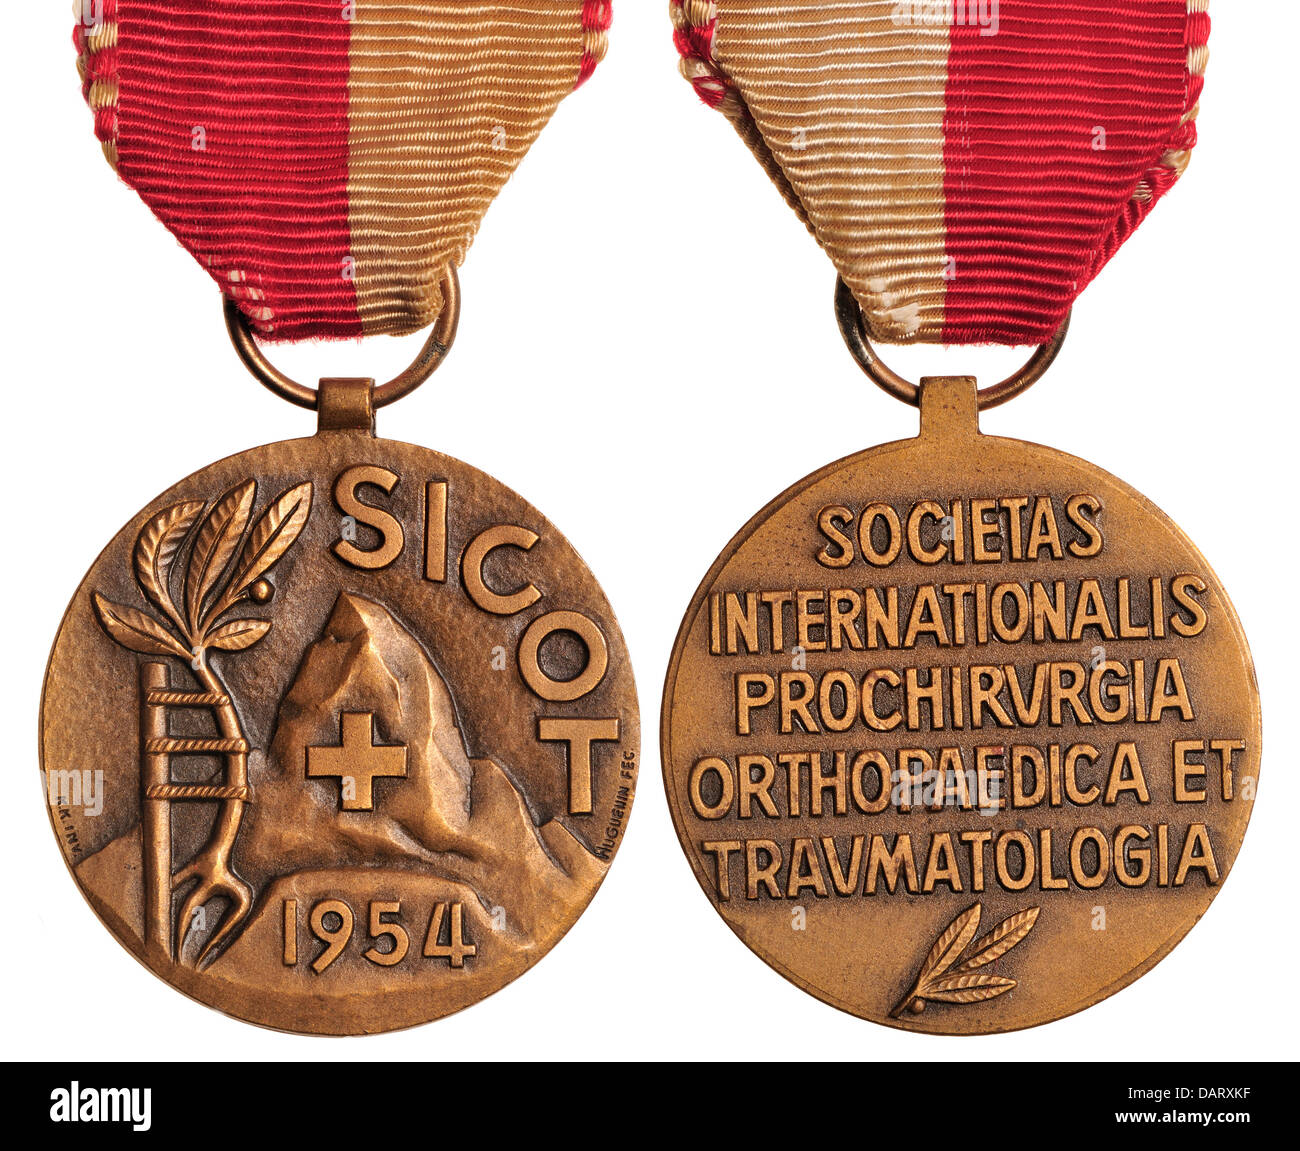 SICOT Medal - International Society of Orthopaedic Surgery and Traumatology. Commemorating 1954 conference held in Berne Stock Photo